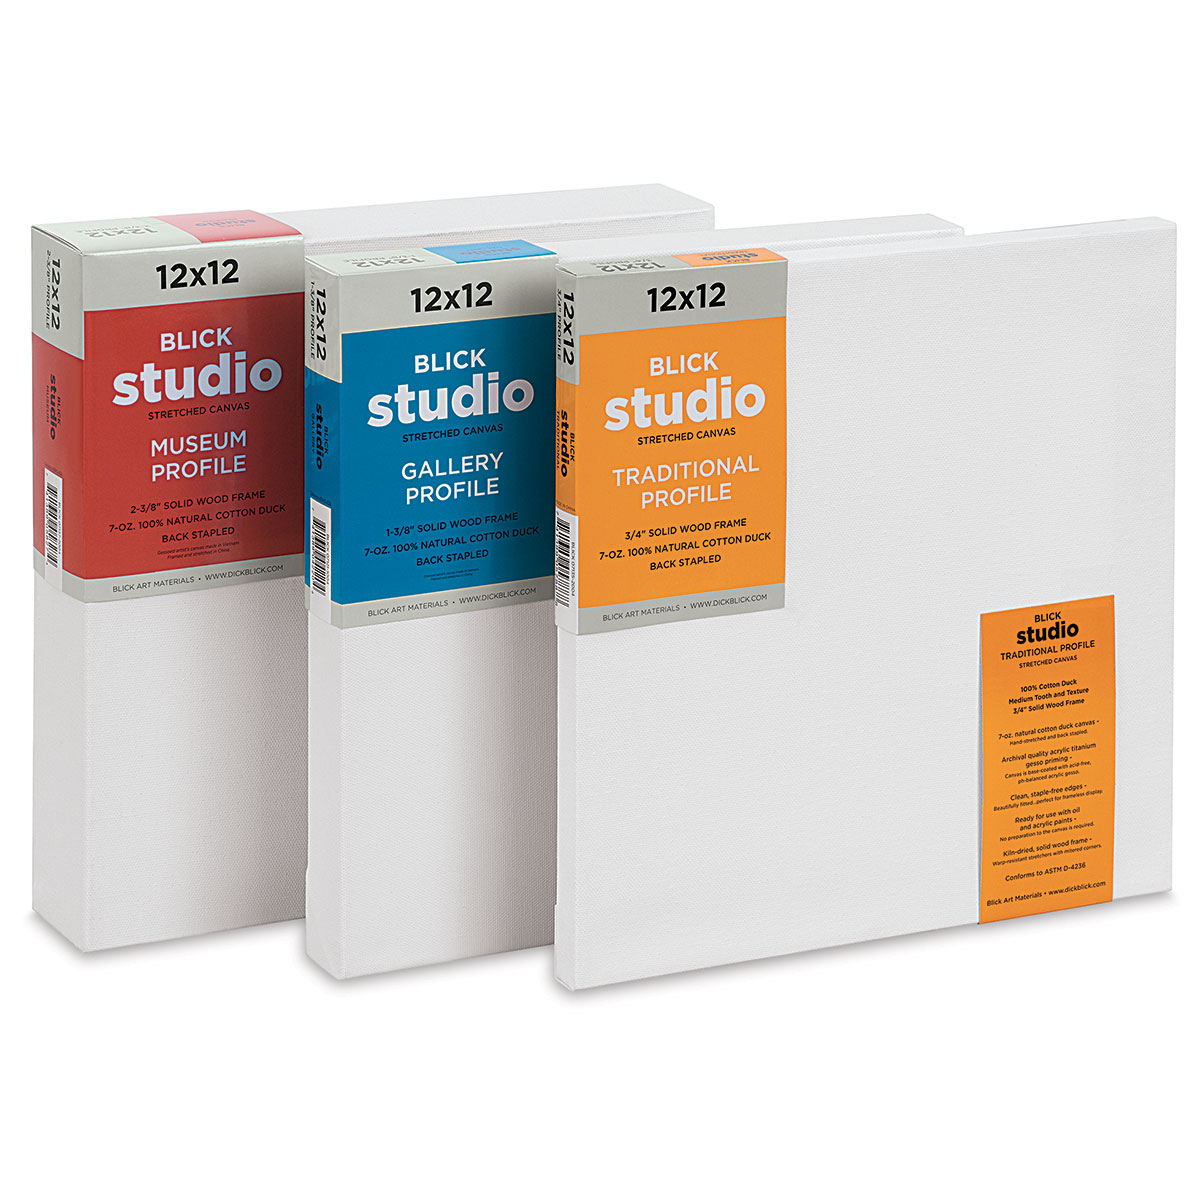 U.S. Art Supply 36 inch Diameter Round Gallery Depth 1-1/2 Profile  Stretched Canvas 2-Pack - Acrylic Gesso Triple Primed 12-ounce 100% Cotton  Acid-Free Back Stapled Pouring Art 